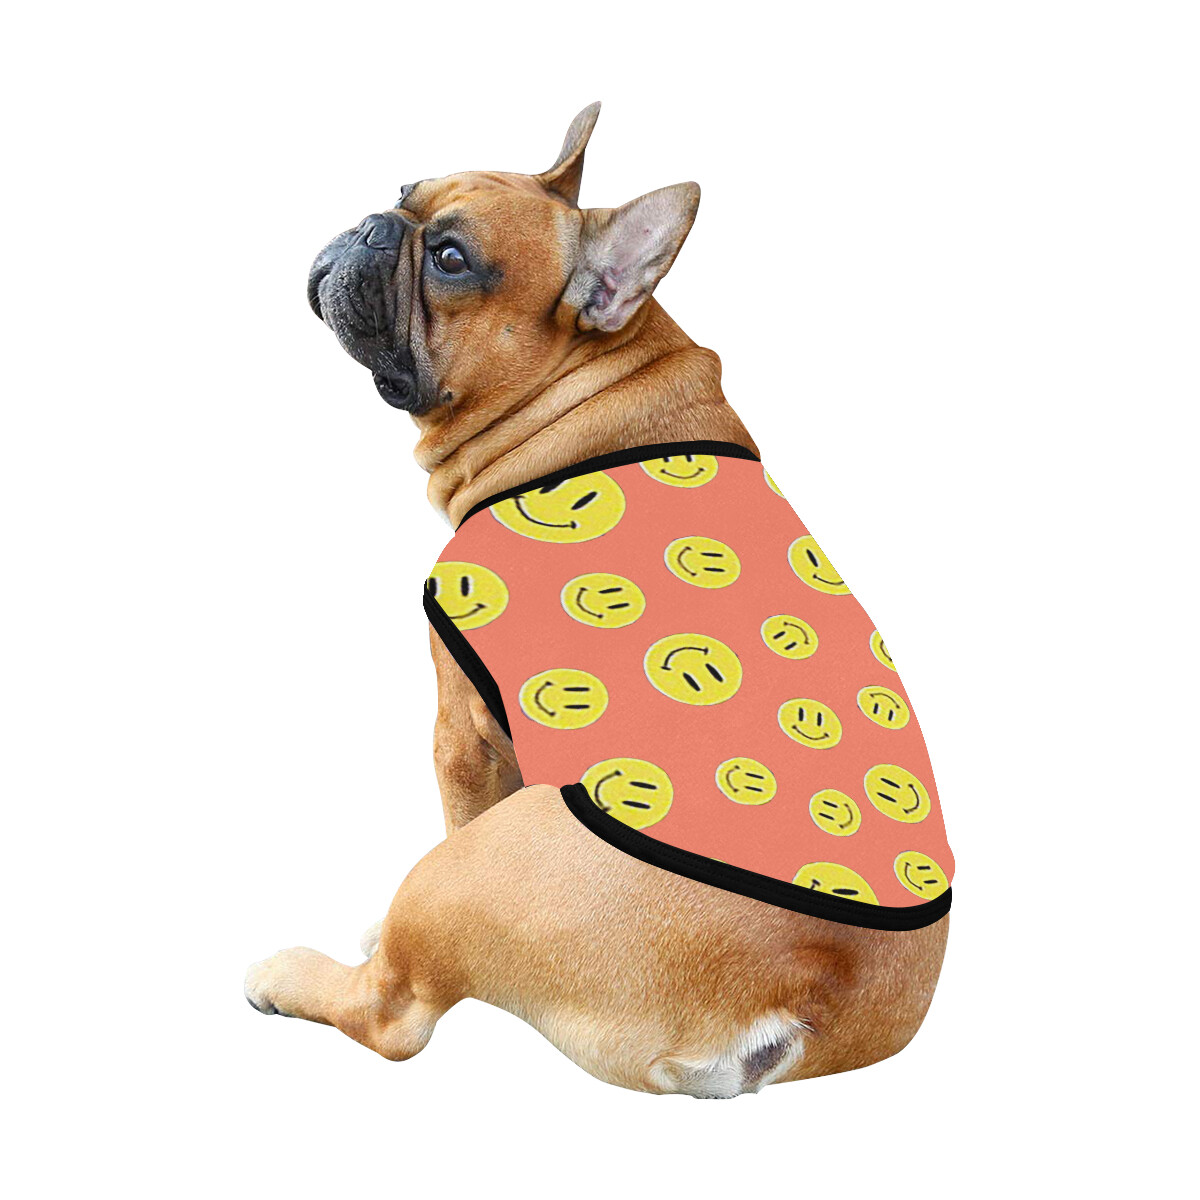 🐕 Happy faces Dog Tank Top, Dog shirt, Dog clothes, Gifts, front back print, 7 sizes XS to 3XL, dog t-shirt, dog t-shirt, dog gift, coral salmon